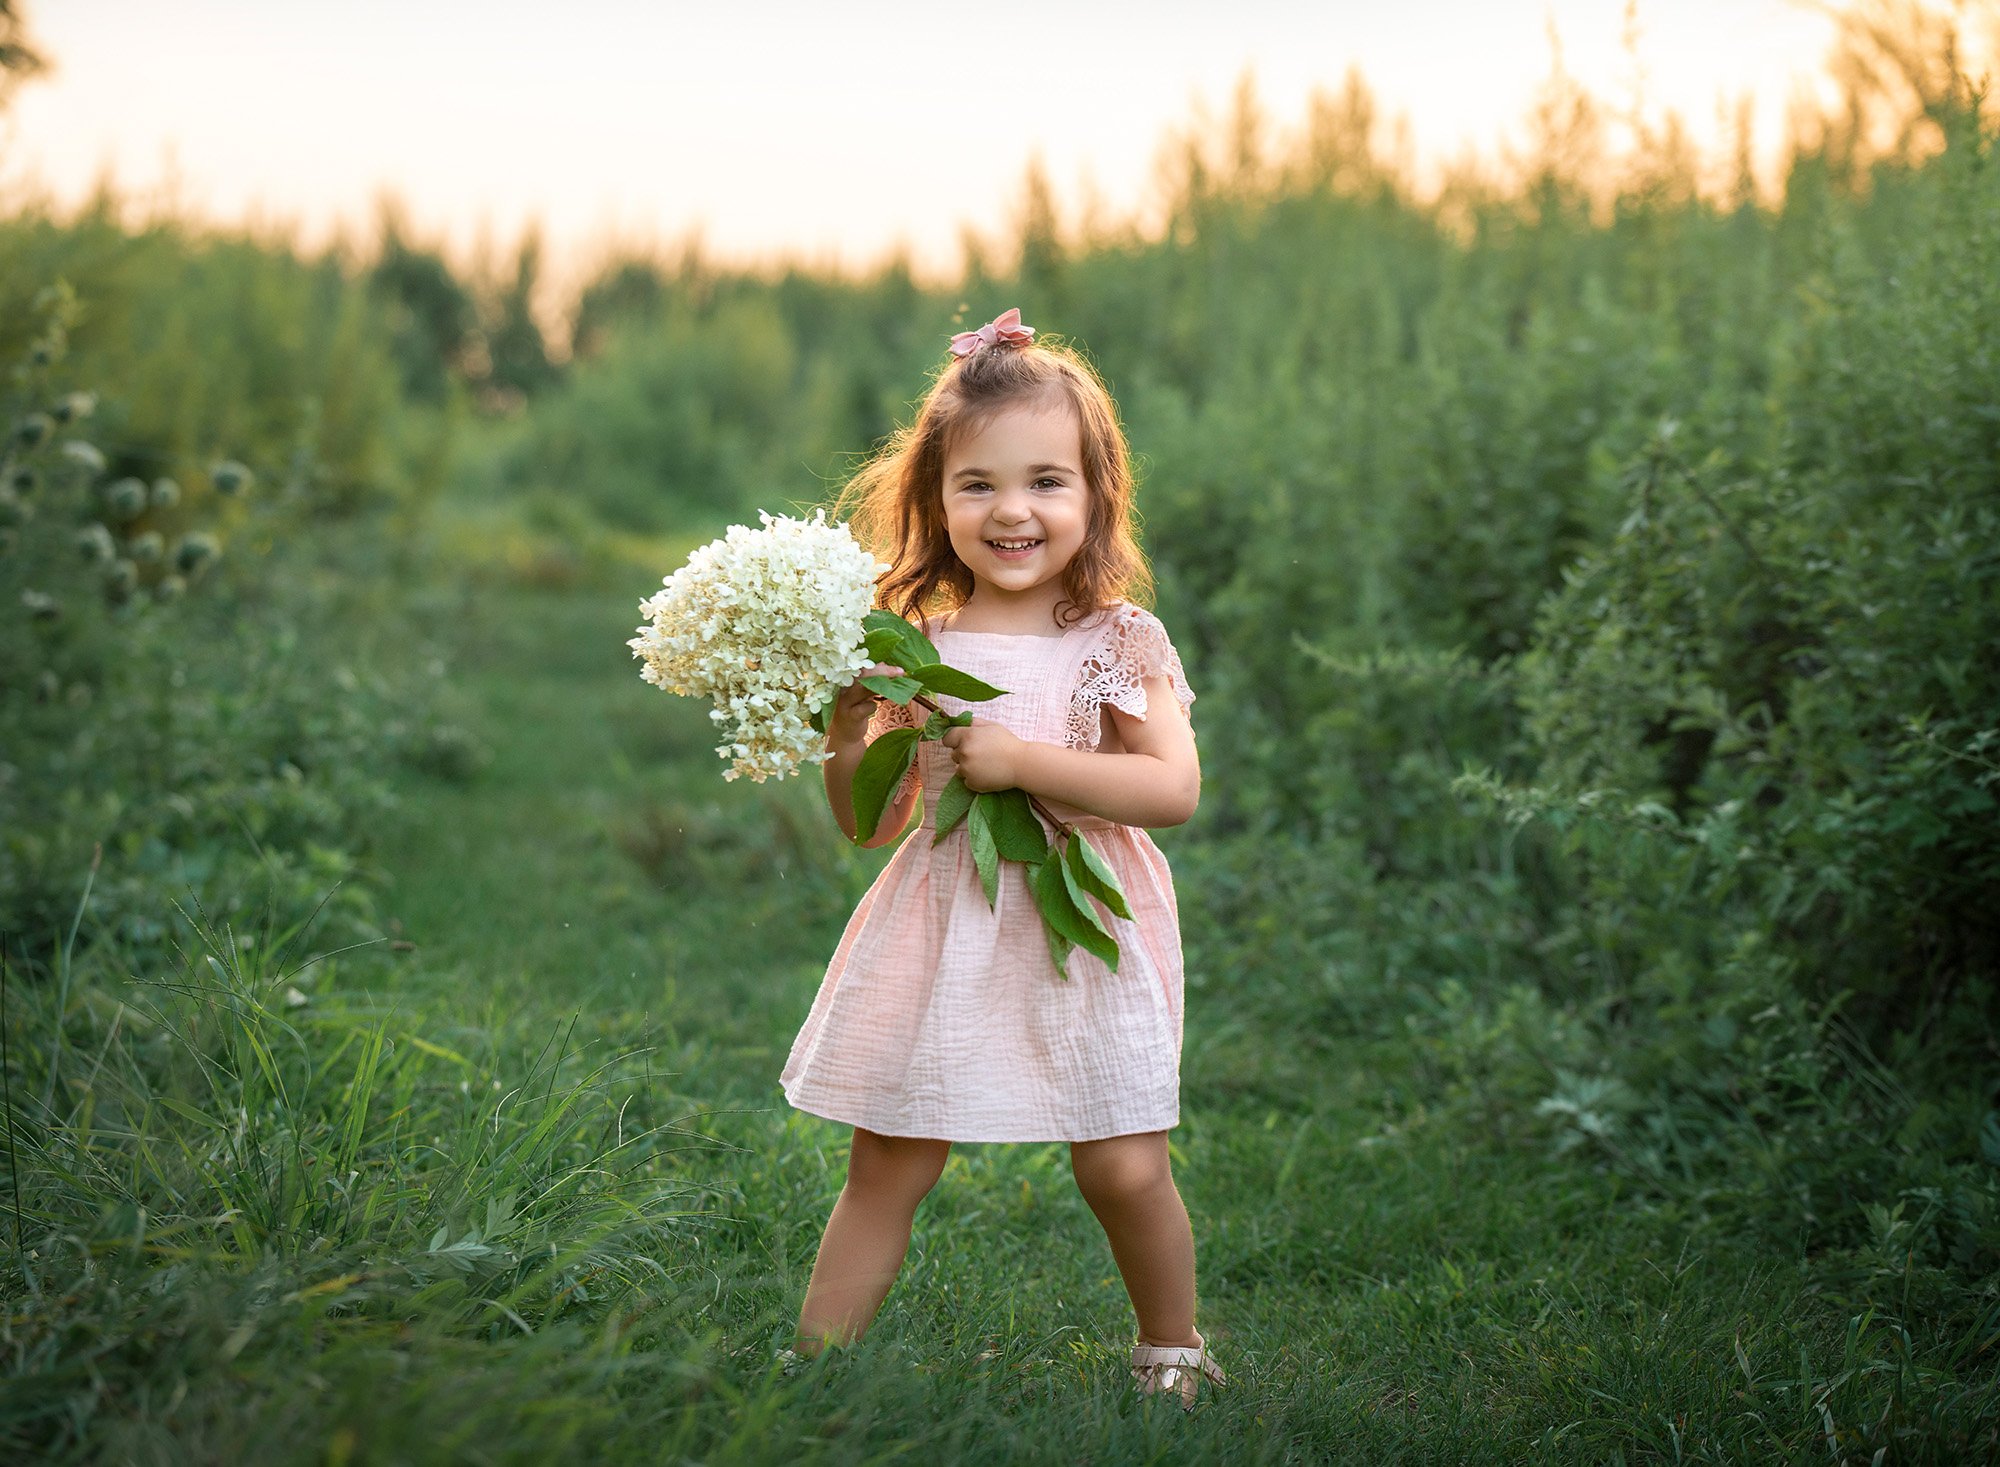 little girl in pink dress smiling in a field while holding white flowers